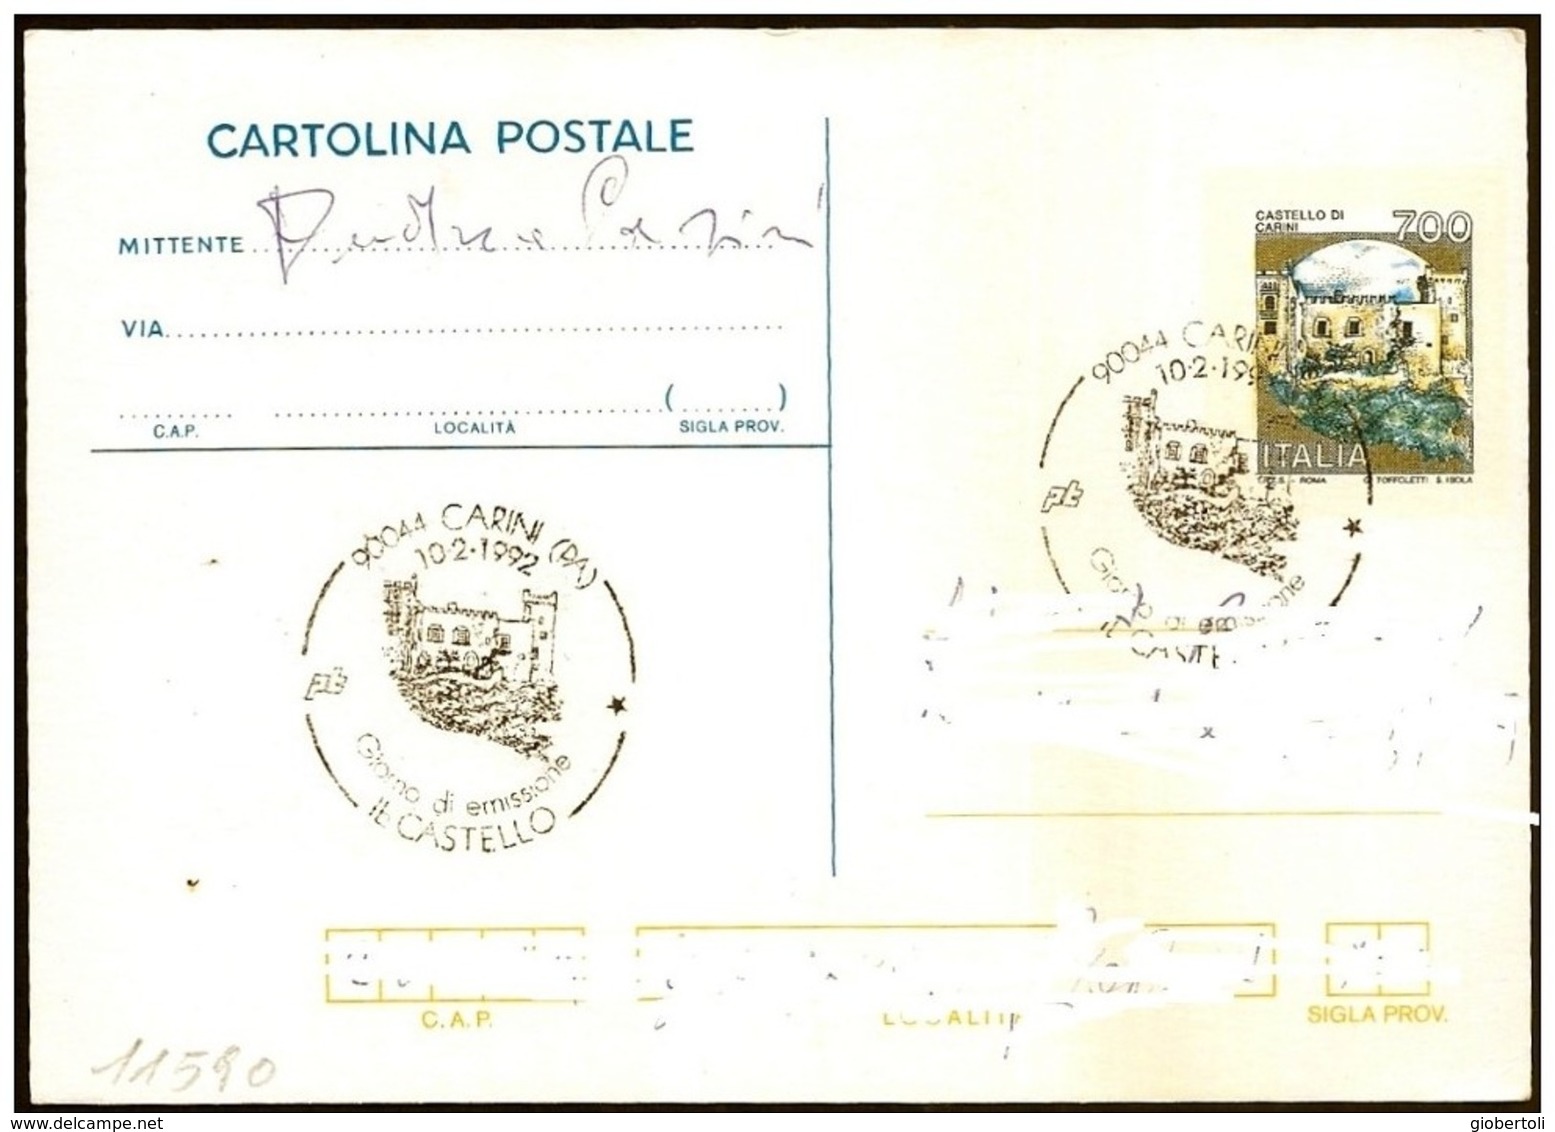 Italia/Italy/Italie: FDC, Intero, Stationery, Entier, Stampa Spostata, Printing Shifted, Impression Déménagé, Castle, Ch - Entiers Postaux